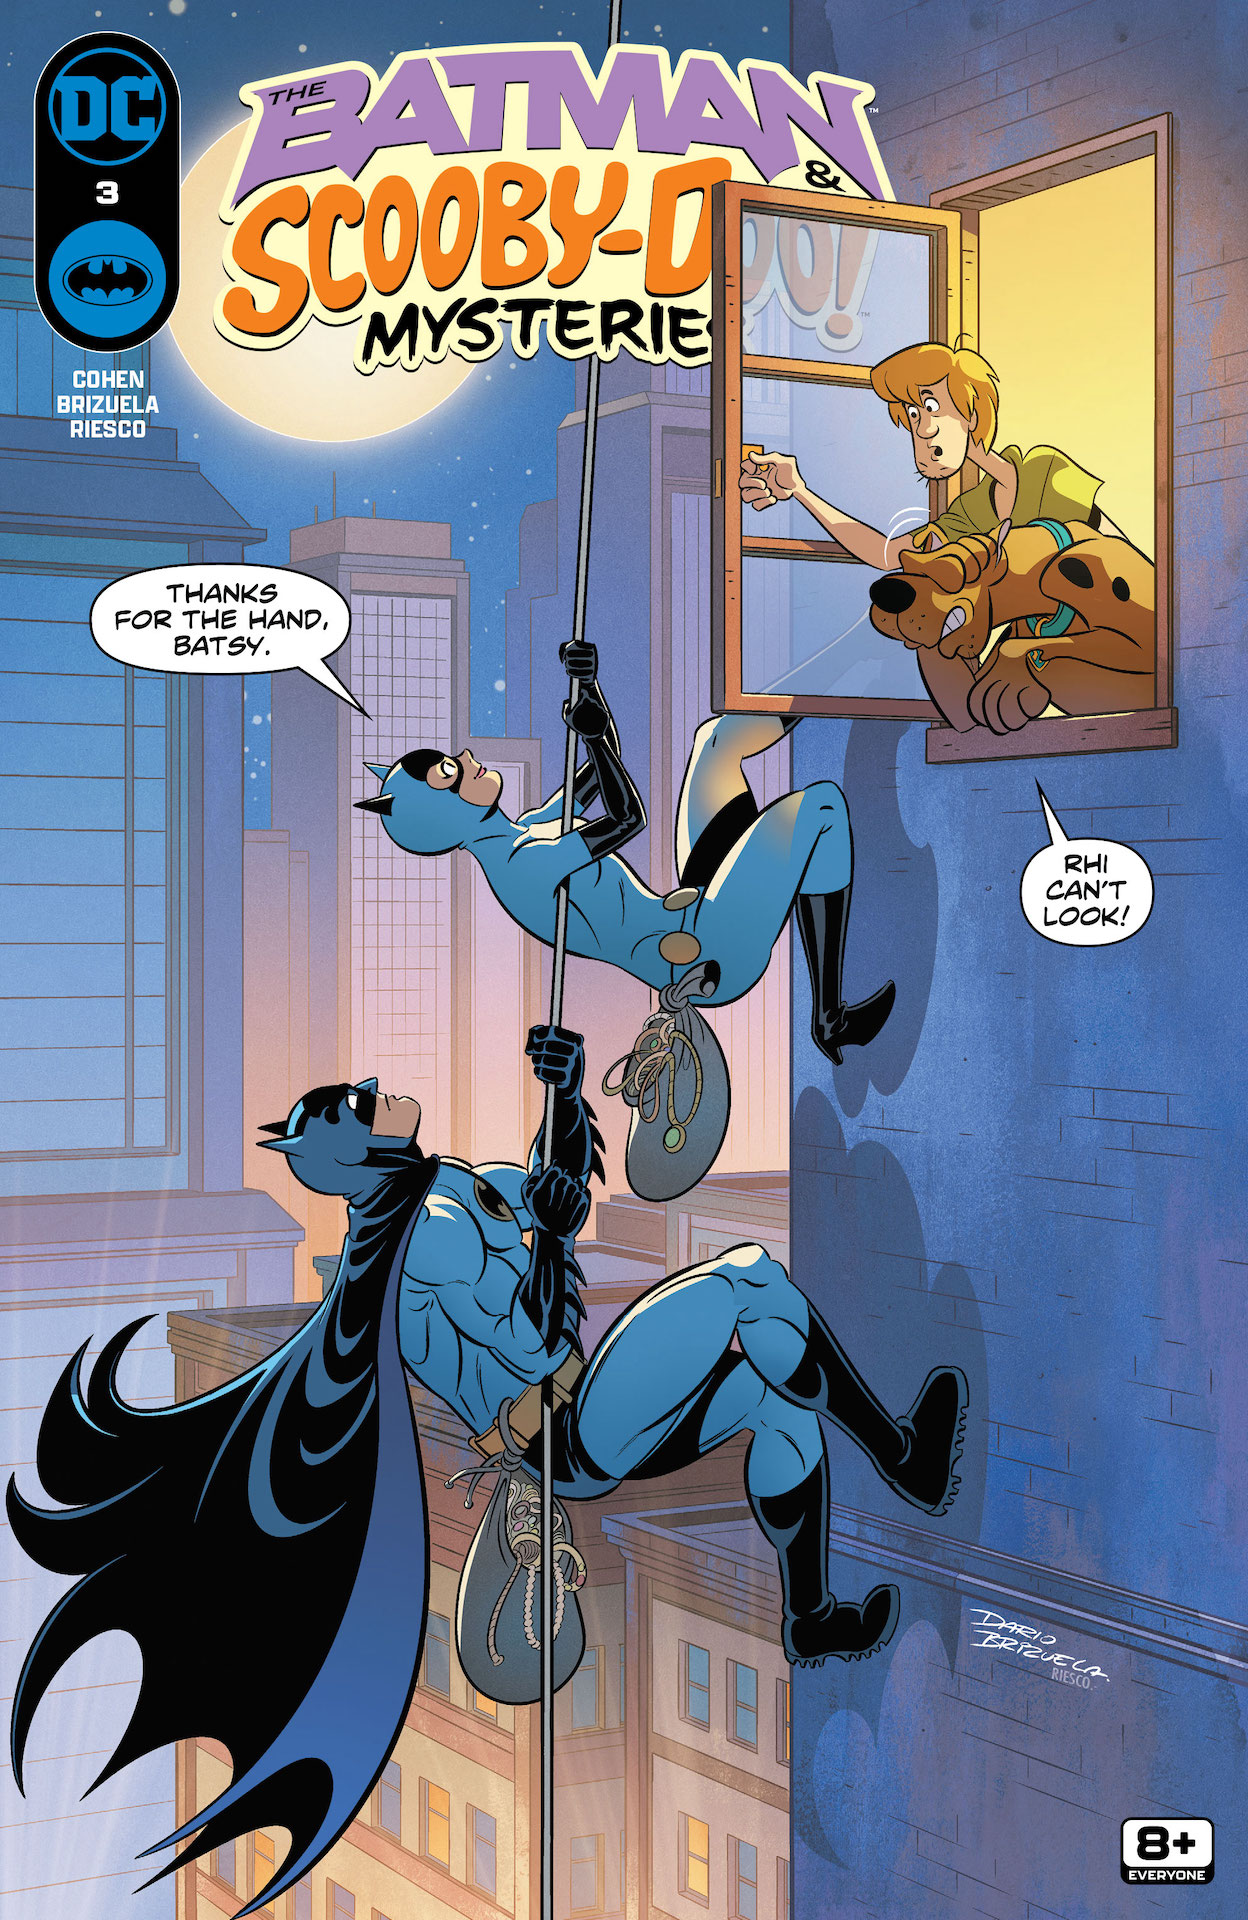 DC Preview: The Batman & Scooby-Doo Mysteries #3